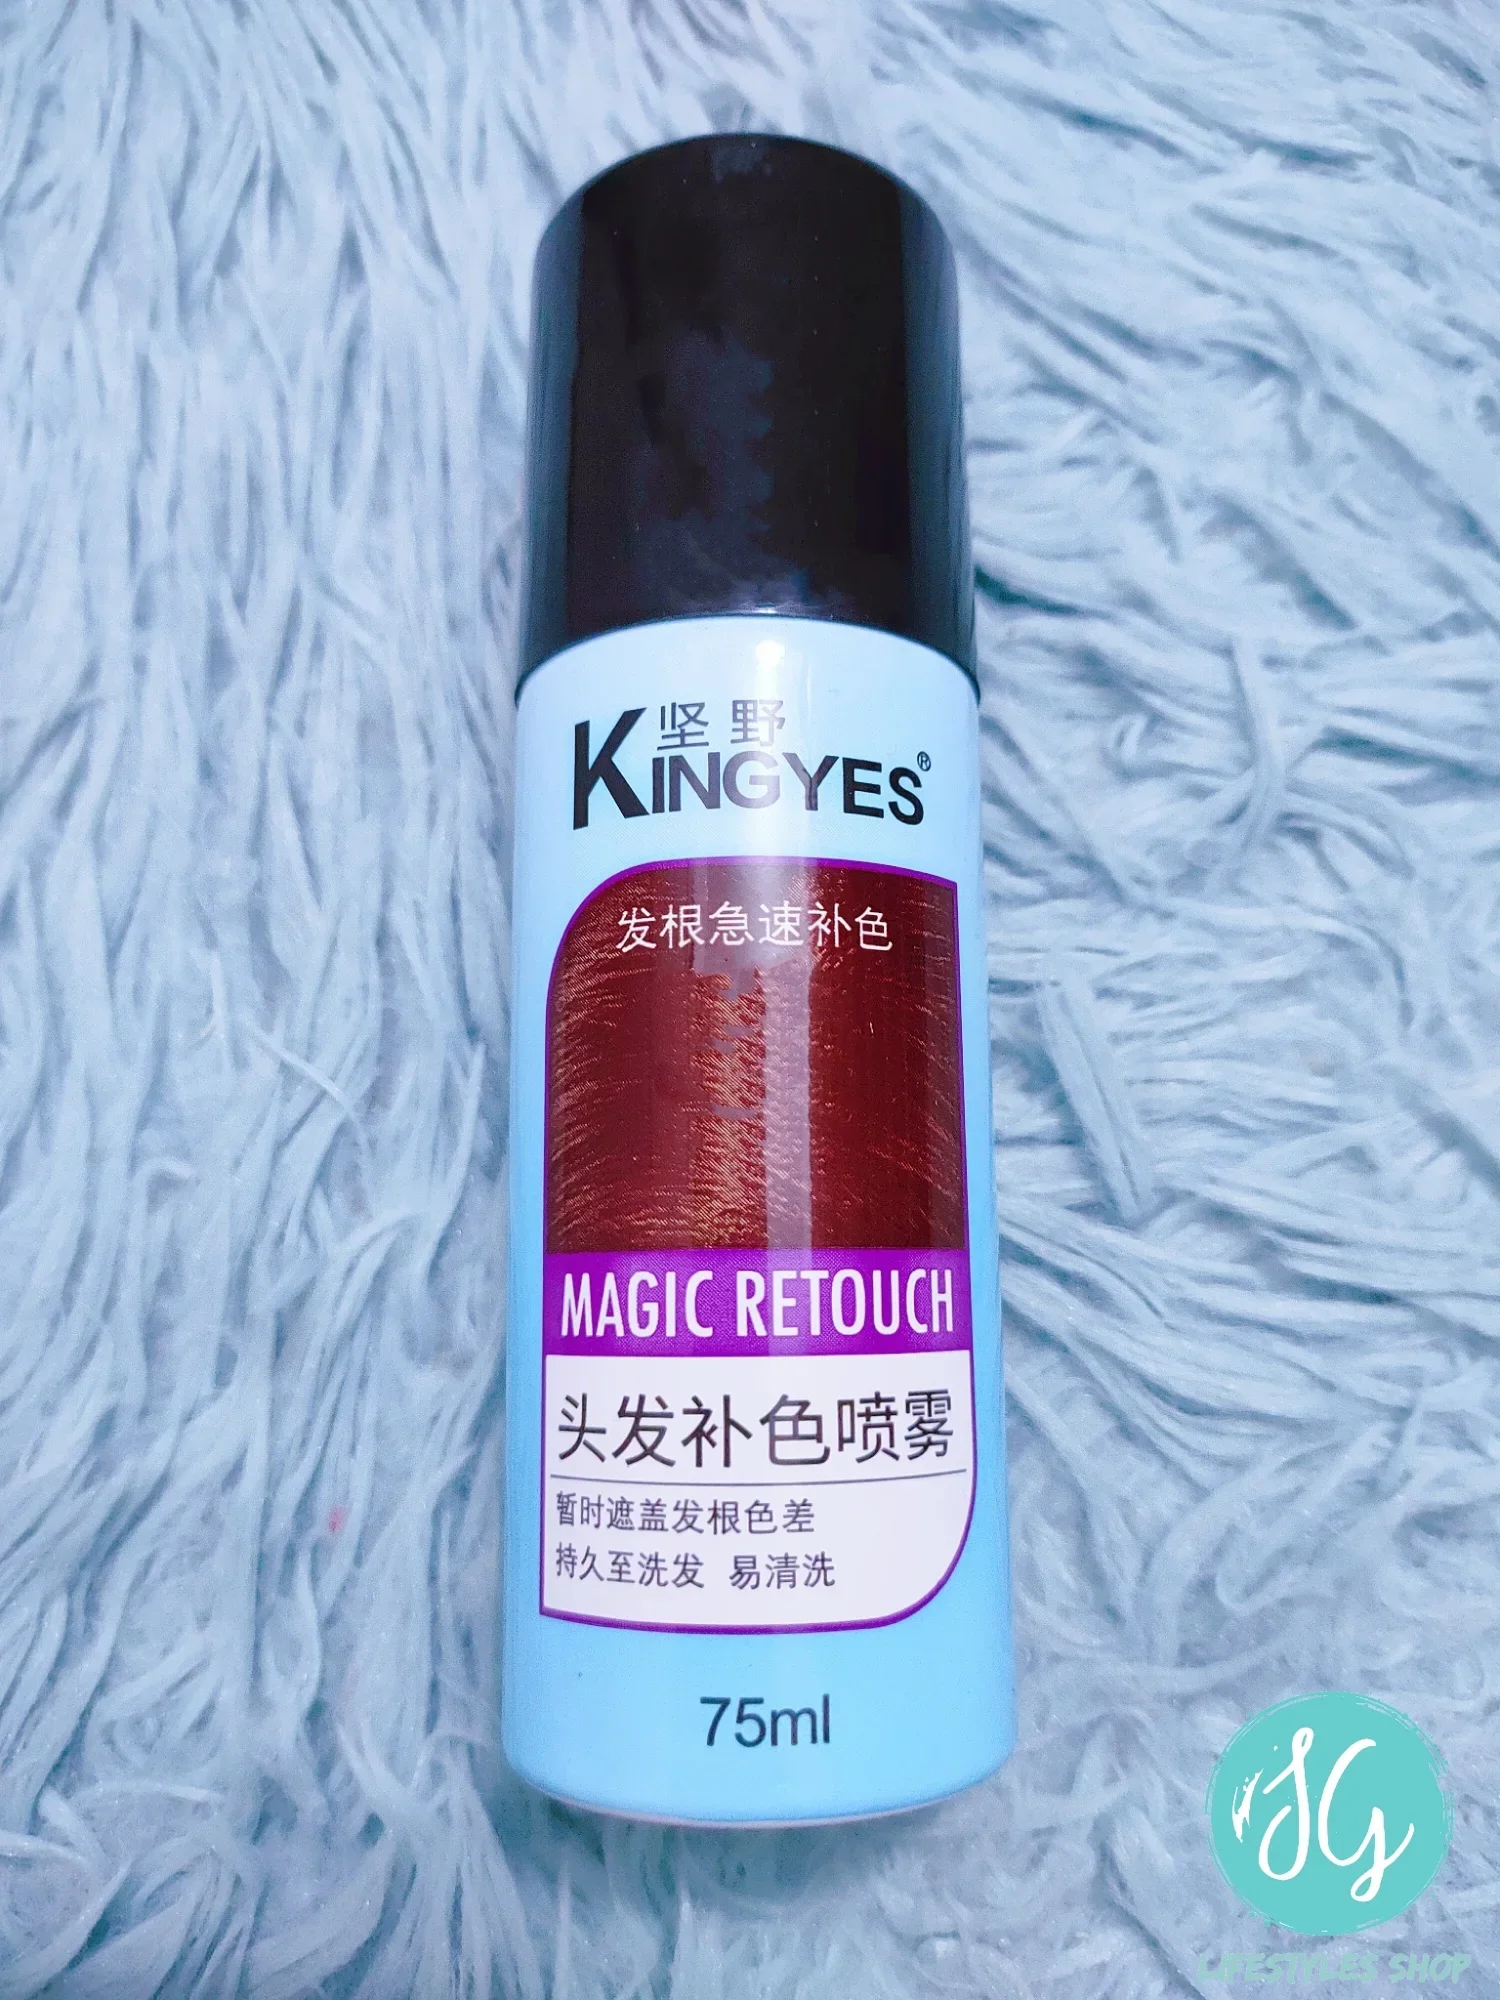 Kingyes Magic Retouch Instant Root Concealer Spray 75ml